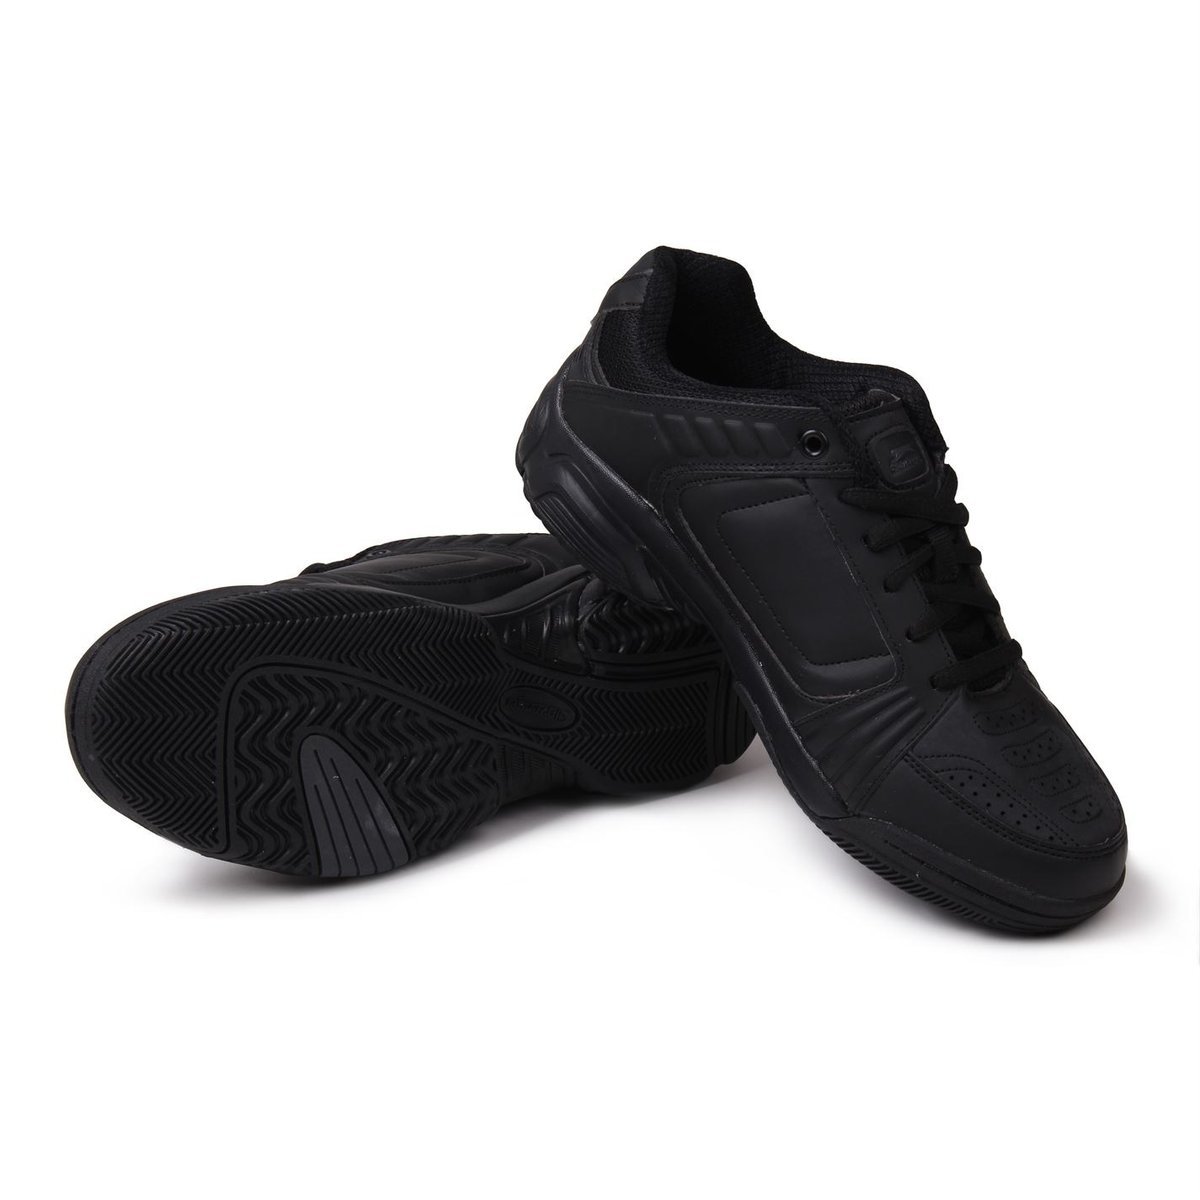 Slazenger | Mens Tennis Shoes | Low Trainers | House of Fraser